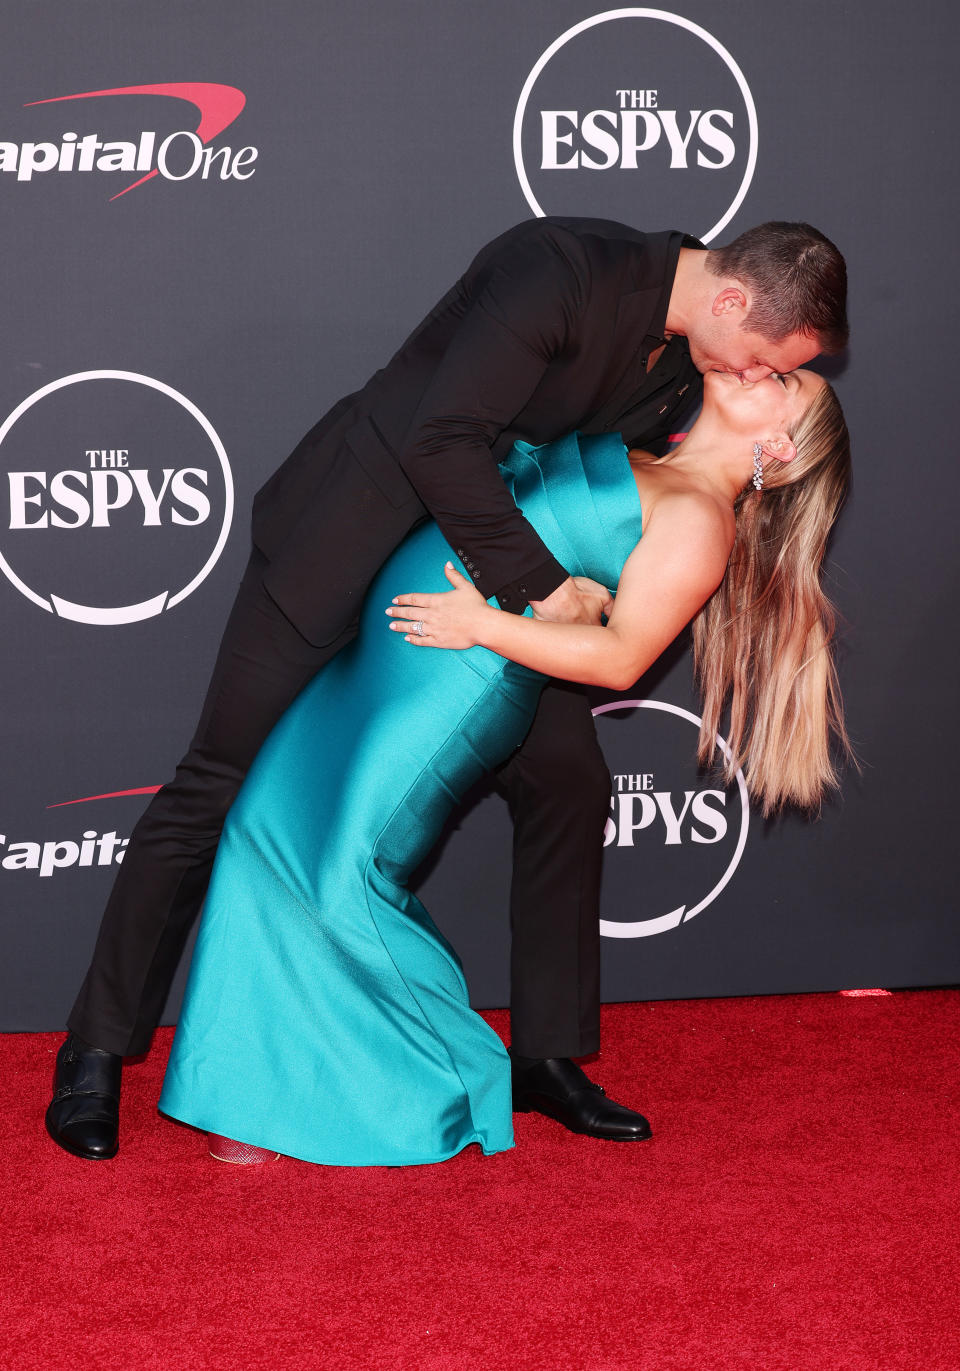 Andrew East and Shawn Johnson at The 2023 ESPYS held at Dolby Theatre on July 12, 2023 in Los Angeles, California. (Photo by Christopher Polk/Variety via Getty Images)